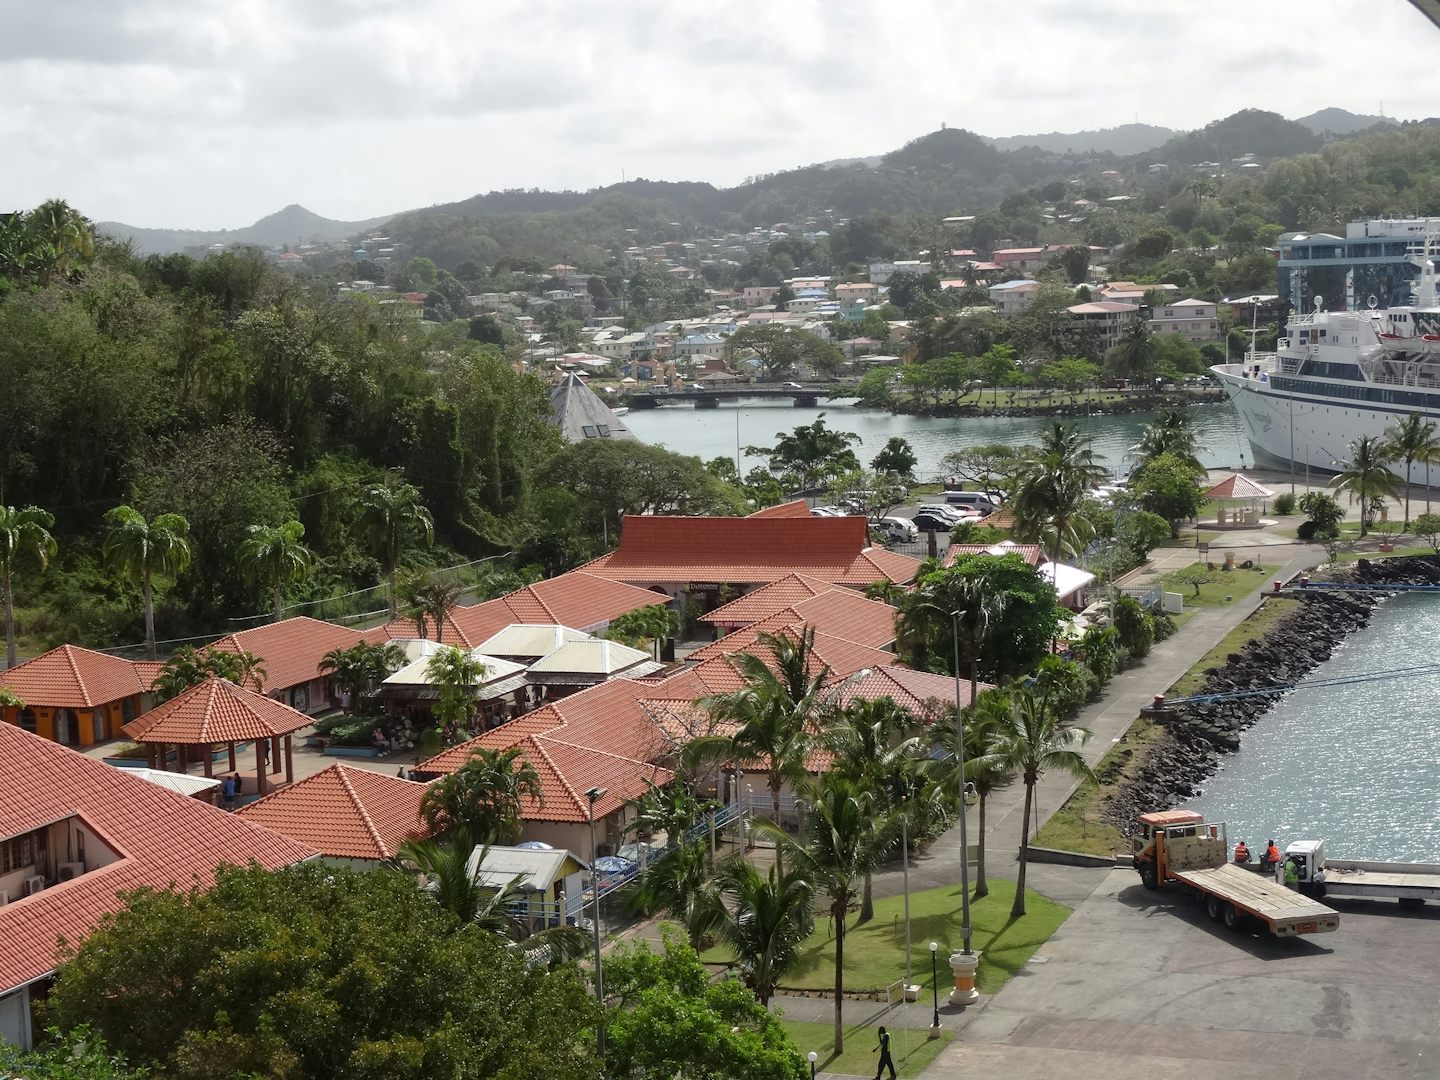 This was looking off the Ship onto St. Lucia and the shopping right off the